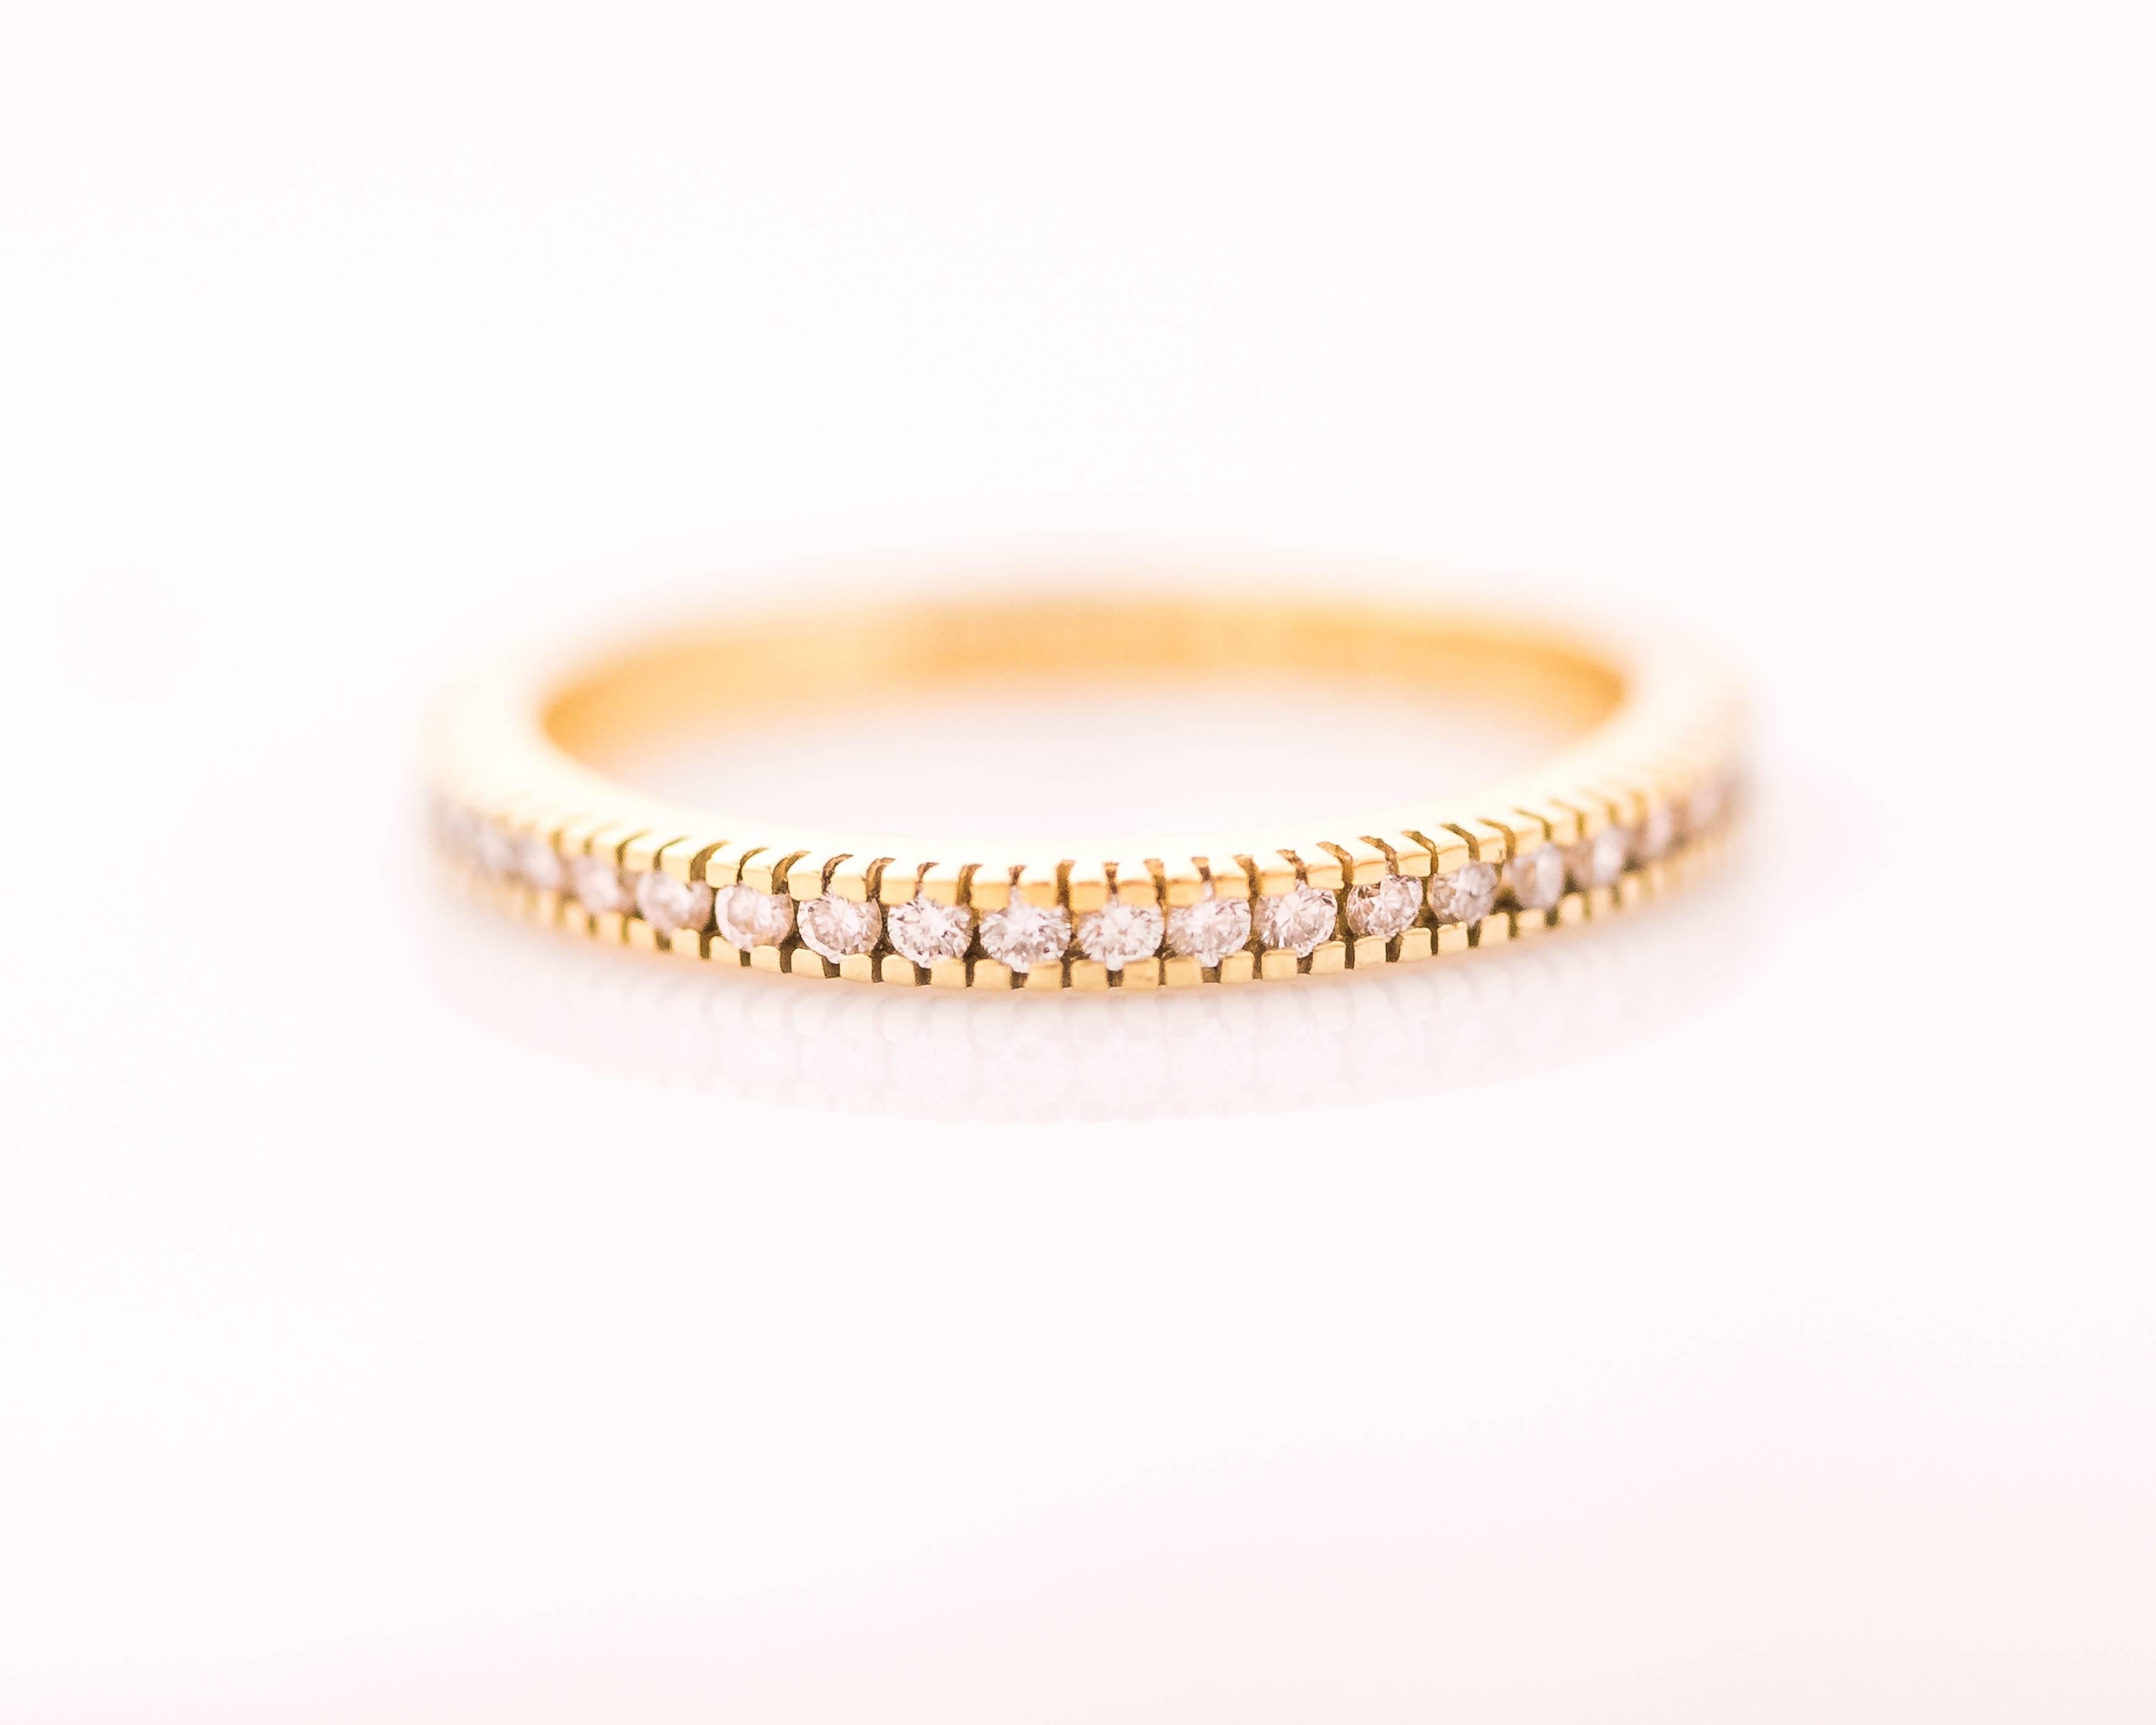  Wear this gorgeous 1990s Designer Hidalgo Diamond Eternity Band alone, Stacked or as a Wedding Band. It features .30 Carats of prong set round brilliant Diamonds set in 18 Karat Yellow Gold along the front half of the shank. The back half of the